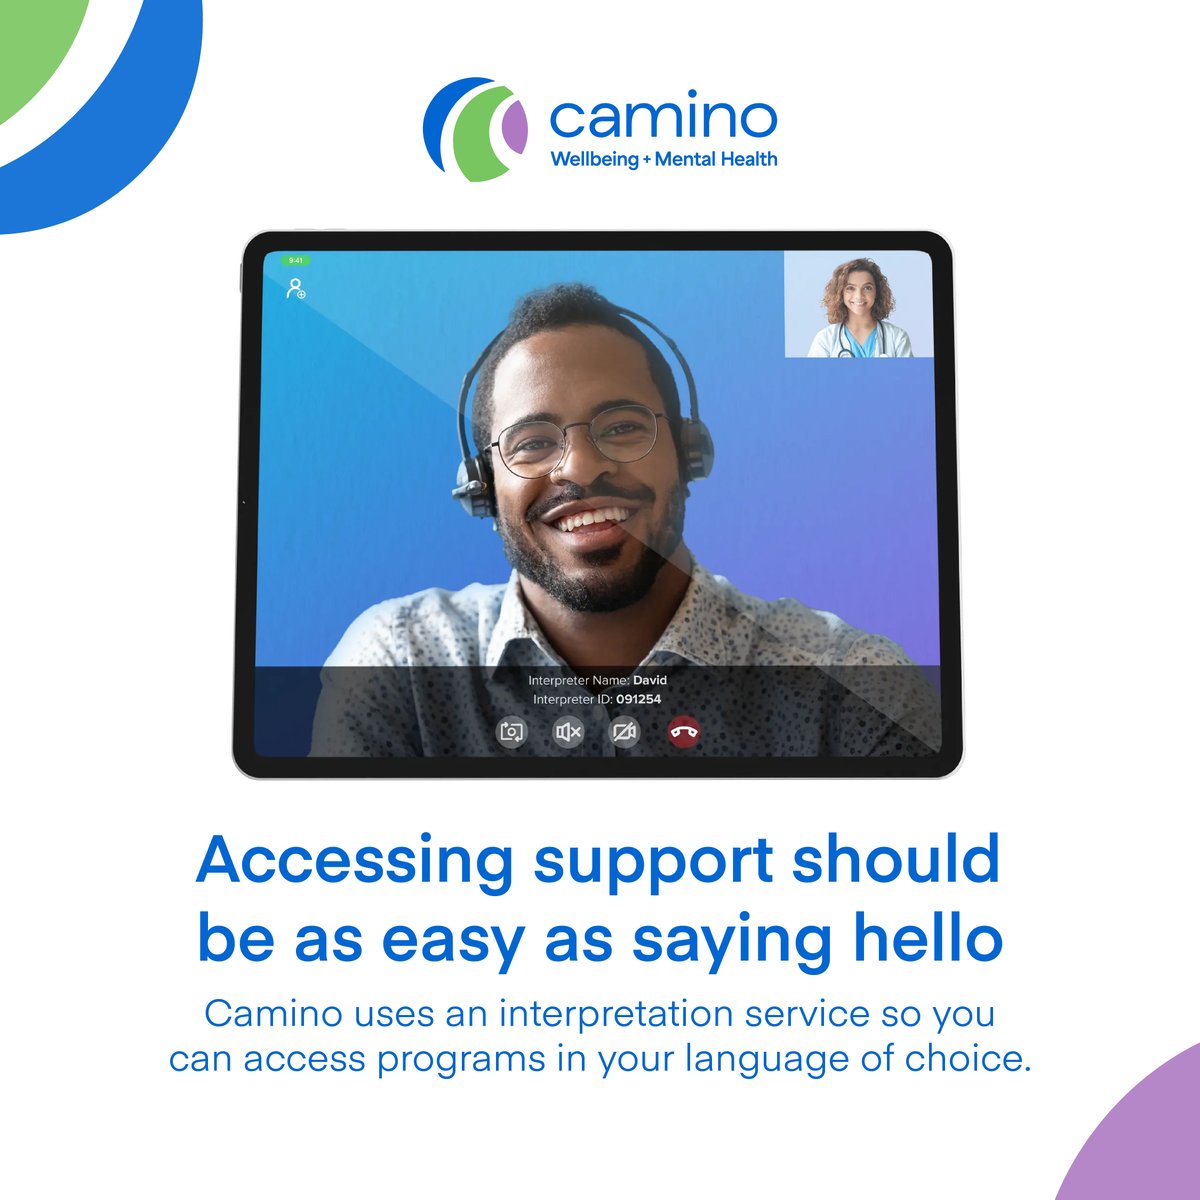 [Follow us @Carizon This account will be inactive soon.] Language barriers can make accessing services challenging. We use an interpretation service so you can access programs in your language of choice. Accessing support should be as easy as saying hello.